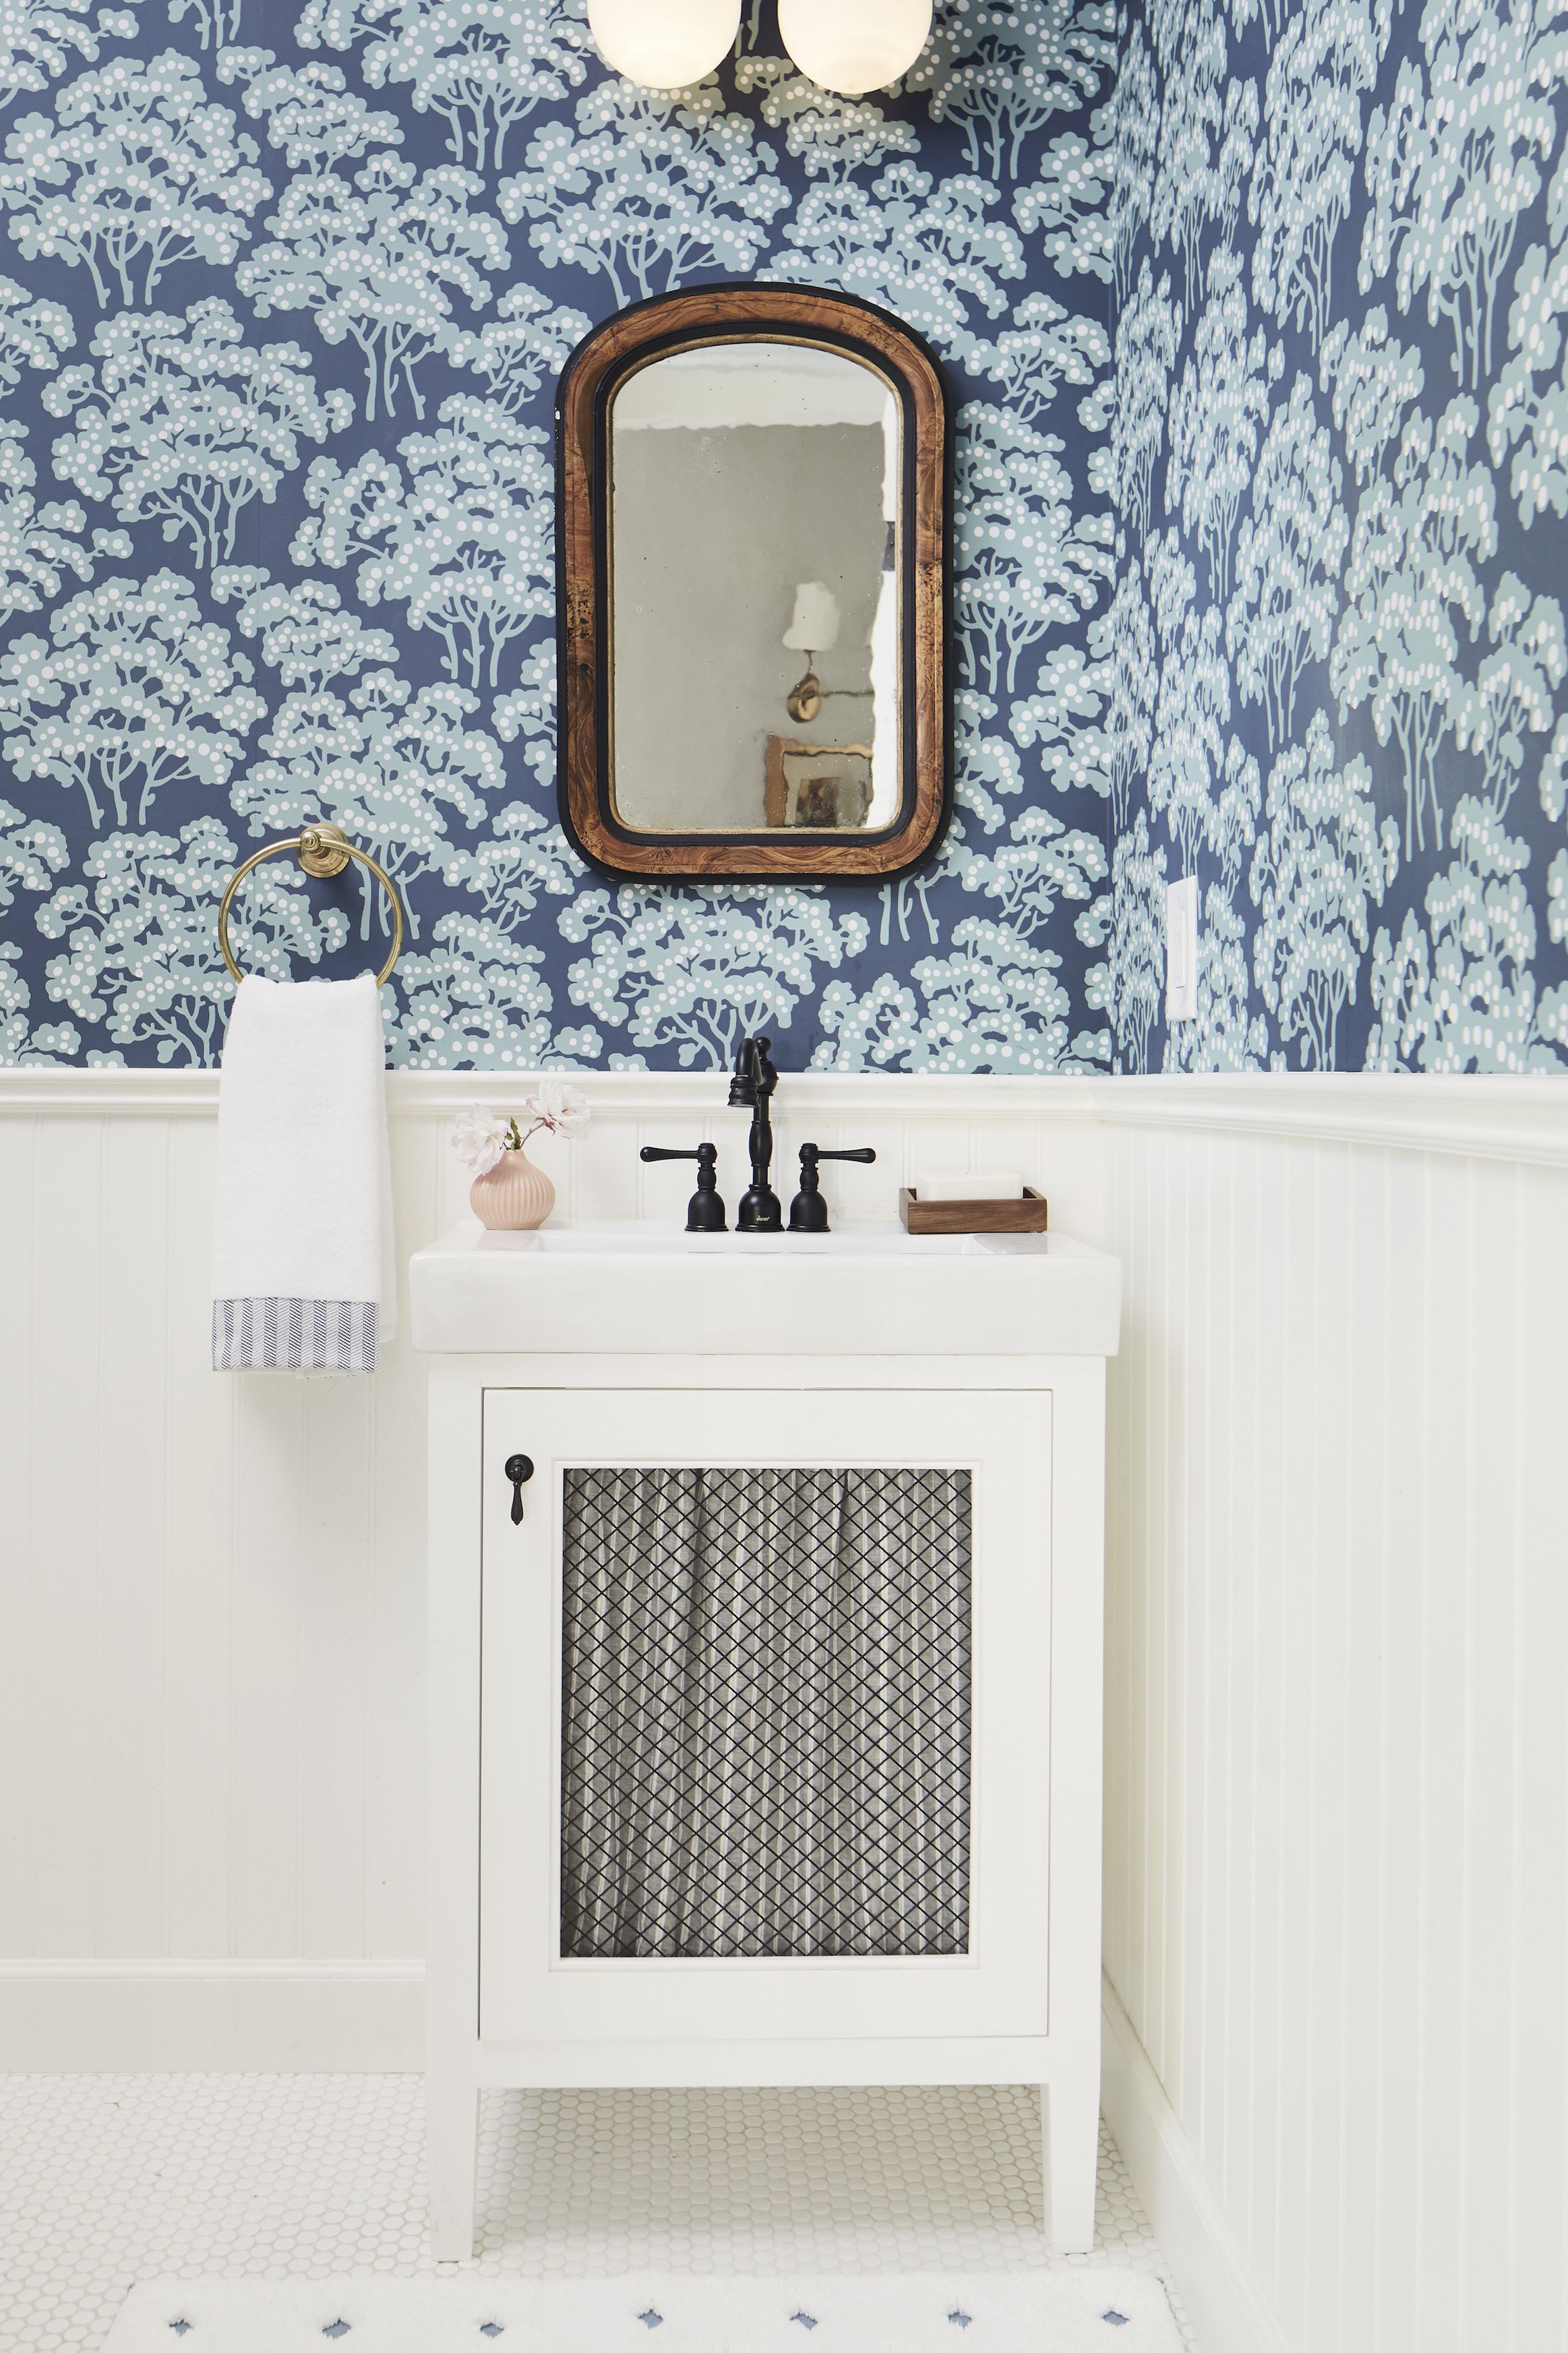 The Beginners Guide to Installing Wallpaper  Abby Organizes